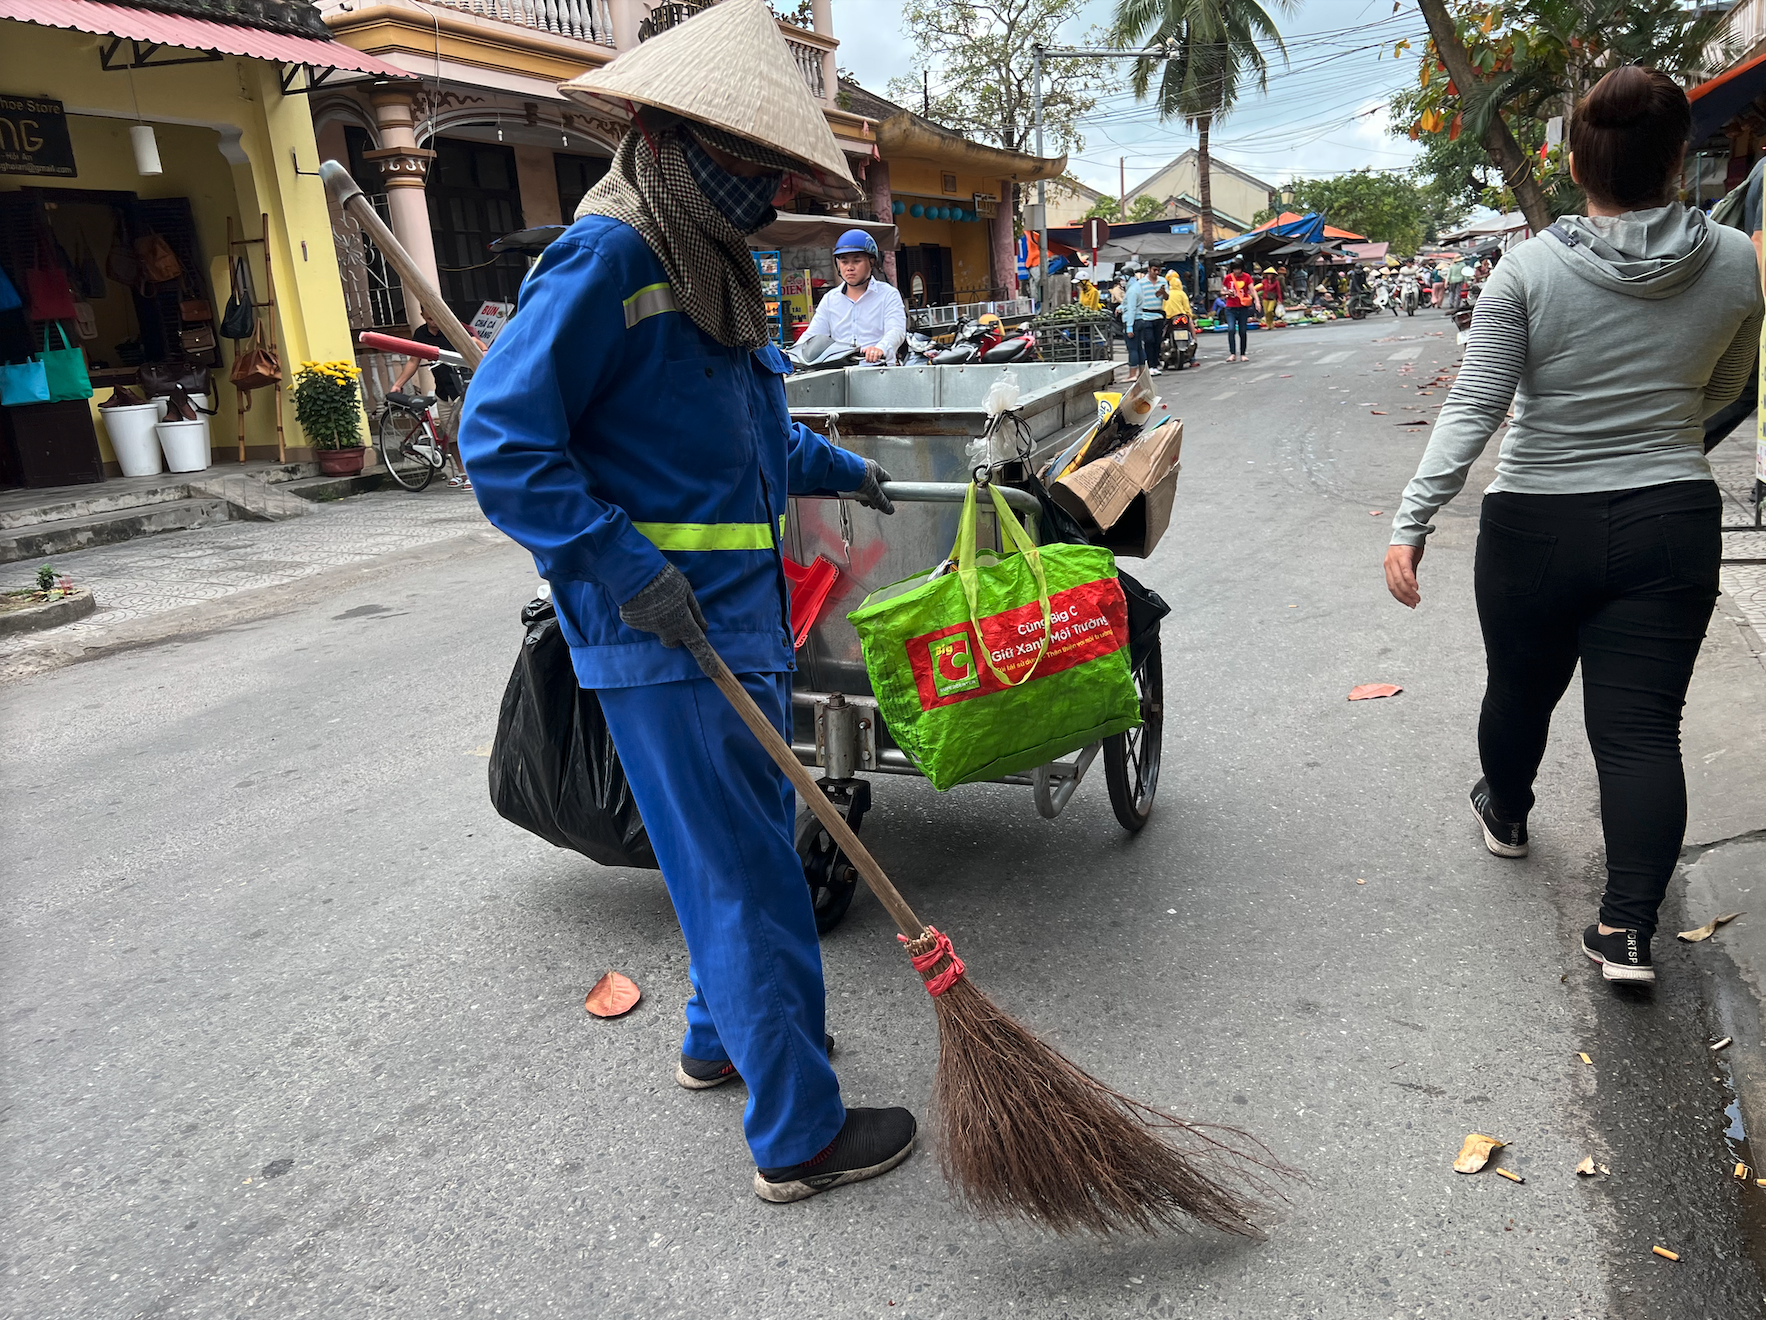 a person wearing a hat and a broom